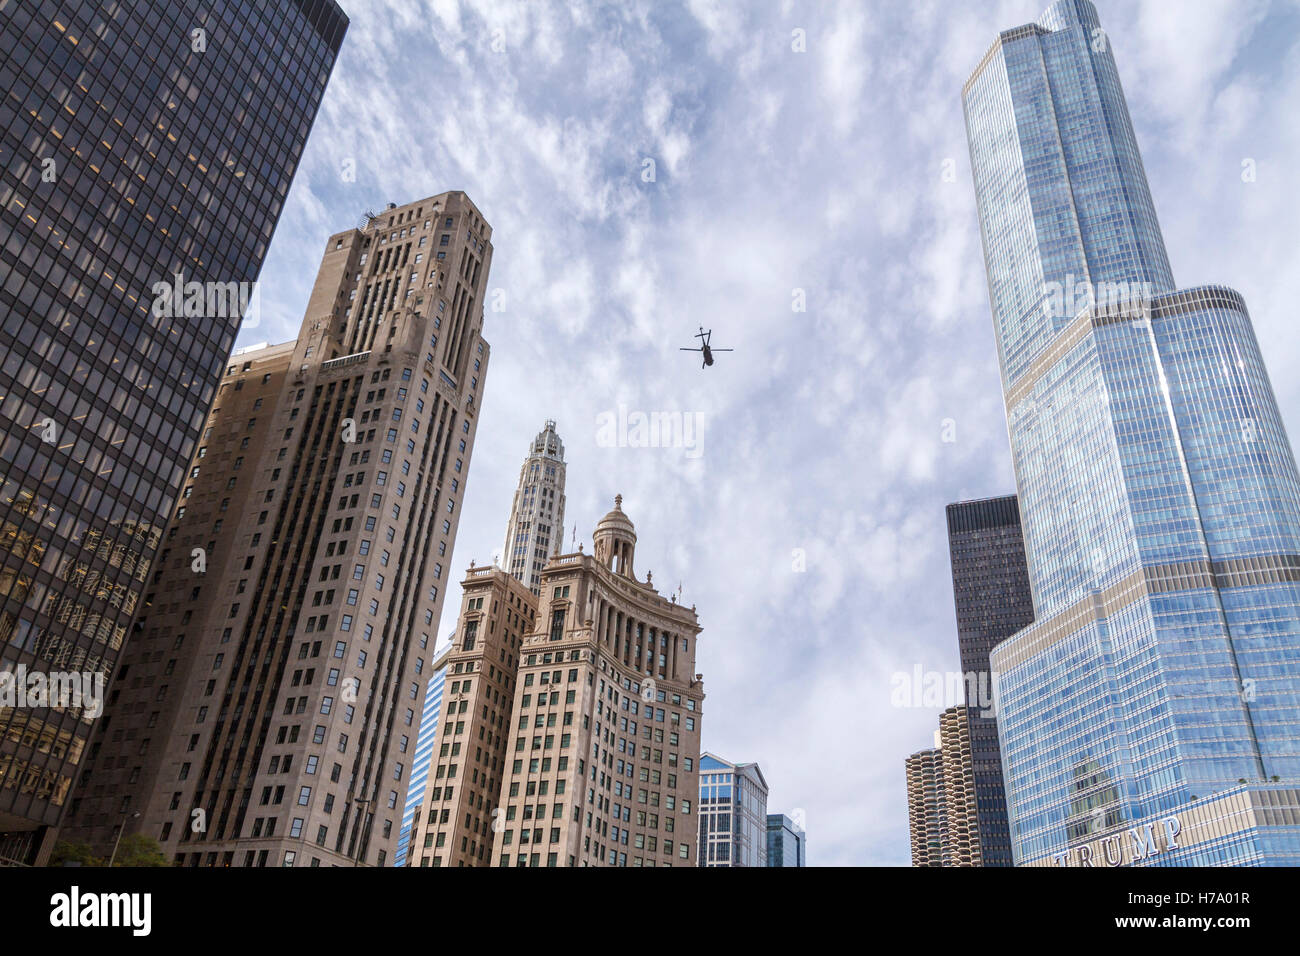 Helicopter flies amongst the skyscrapers of Chicago, Illinois Stock Photo